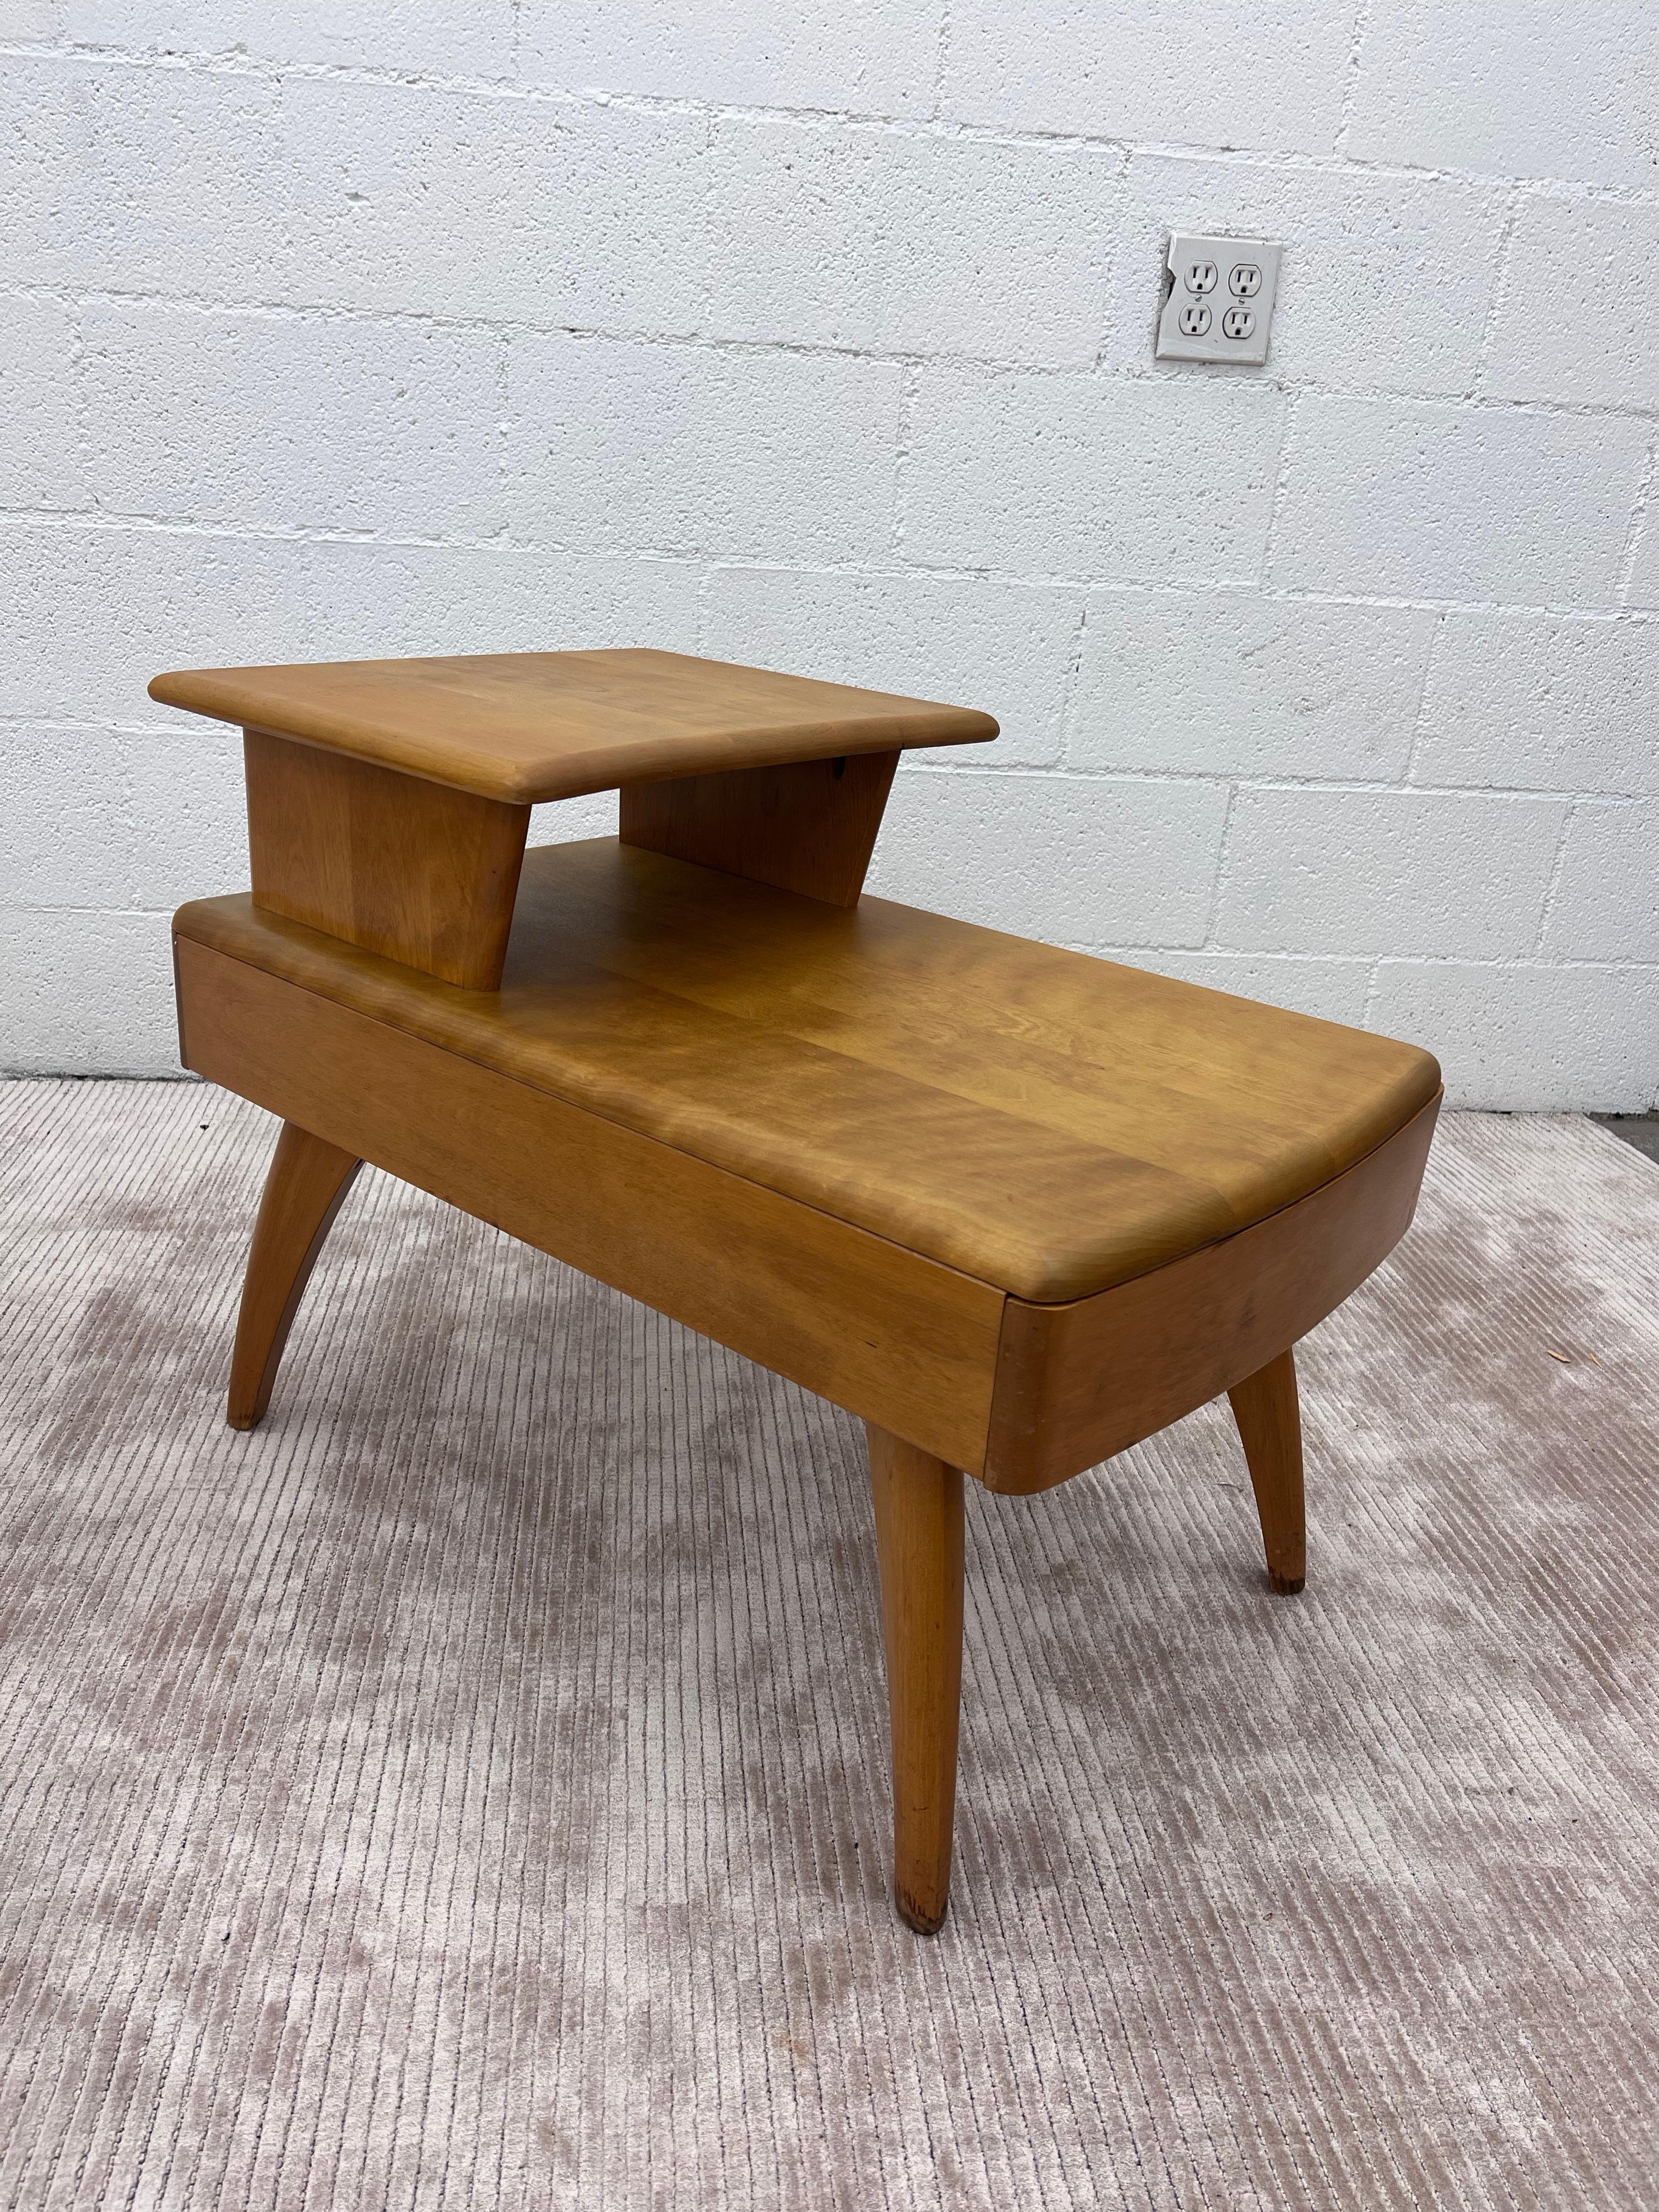 Vintage Heywood Wakefield Mid Century modern 2 Tier Side Table with Drawer For Sale 4